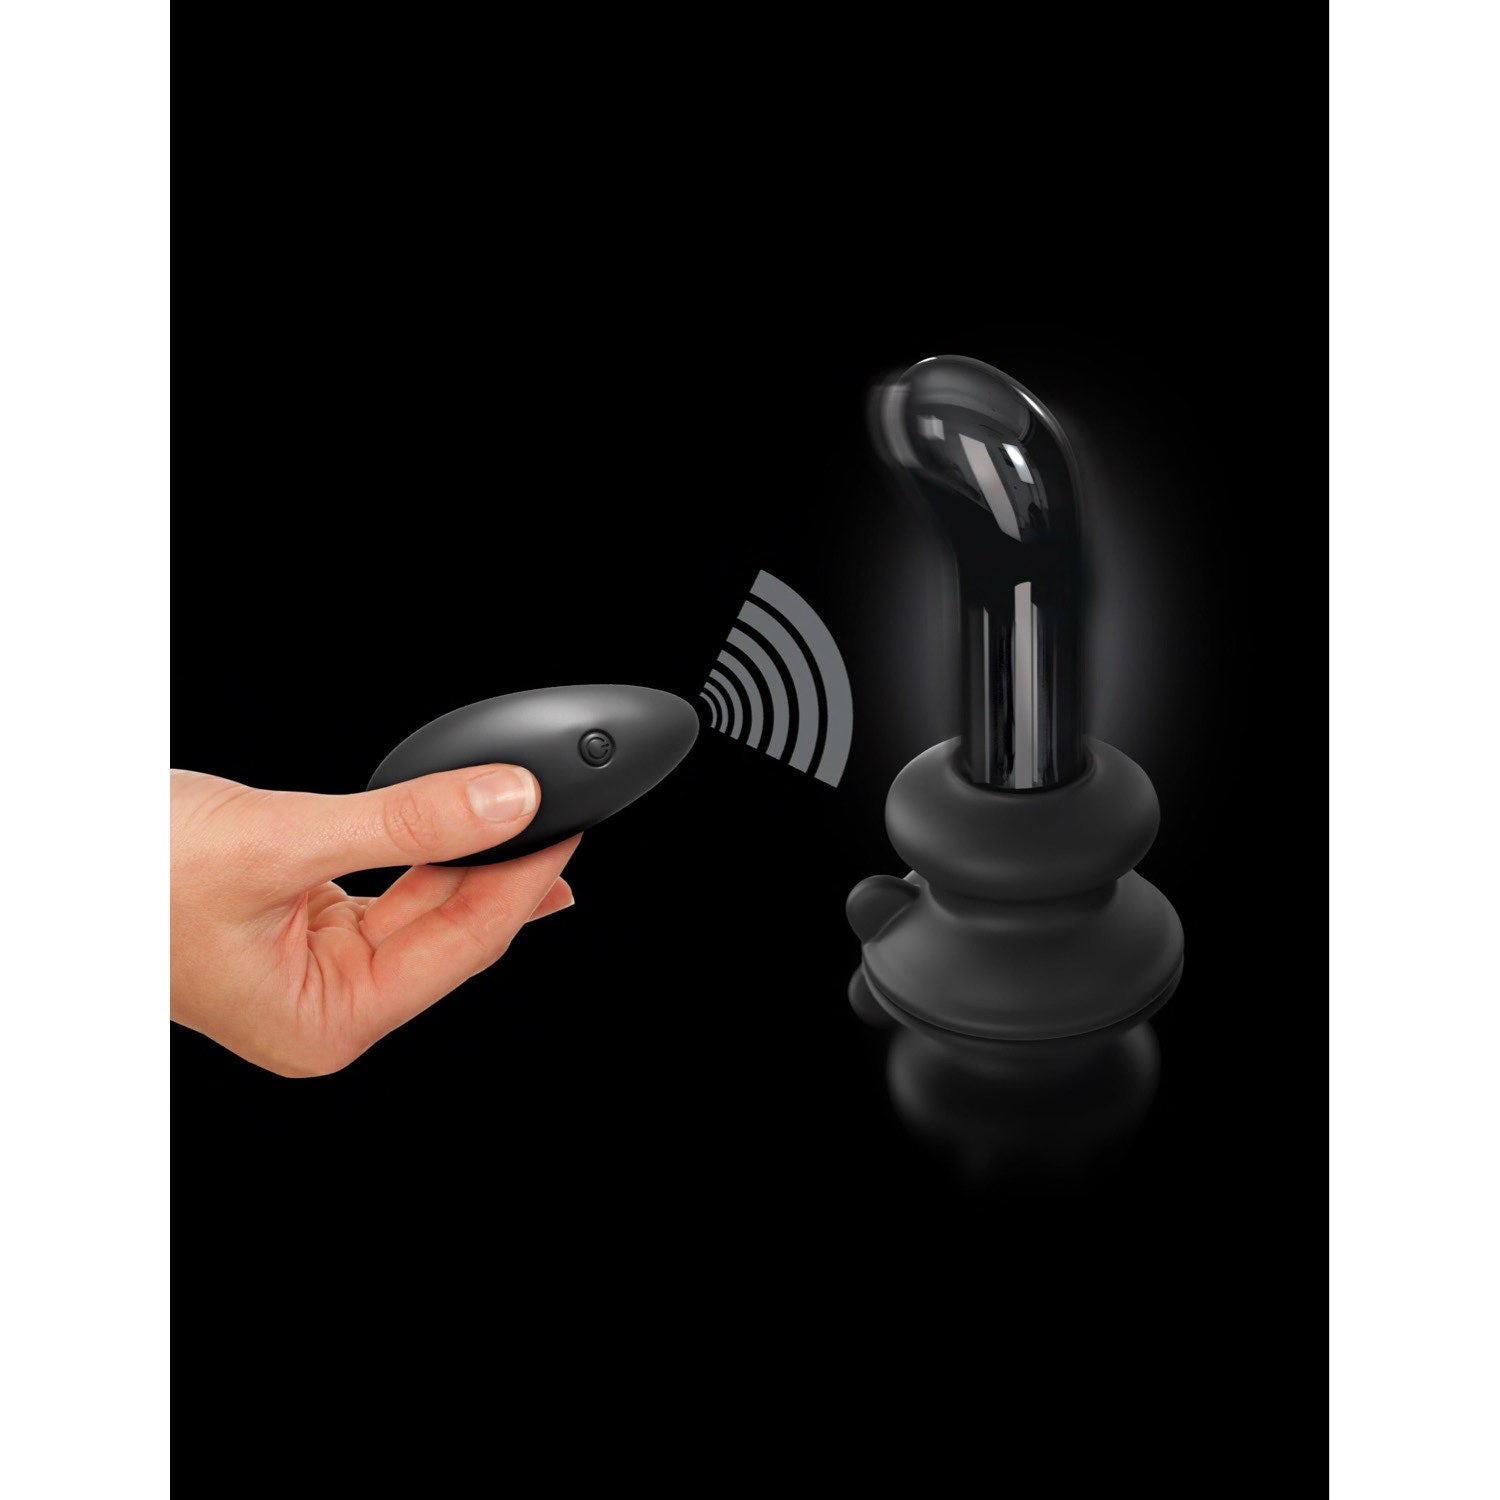 Icicles No. 84 - Black Glass USB Rechargeable Vibrating Butt Plug with Remote by Pipedream